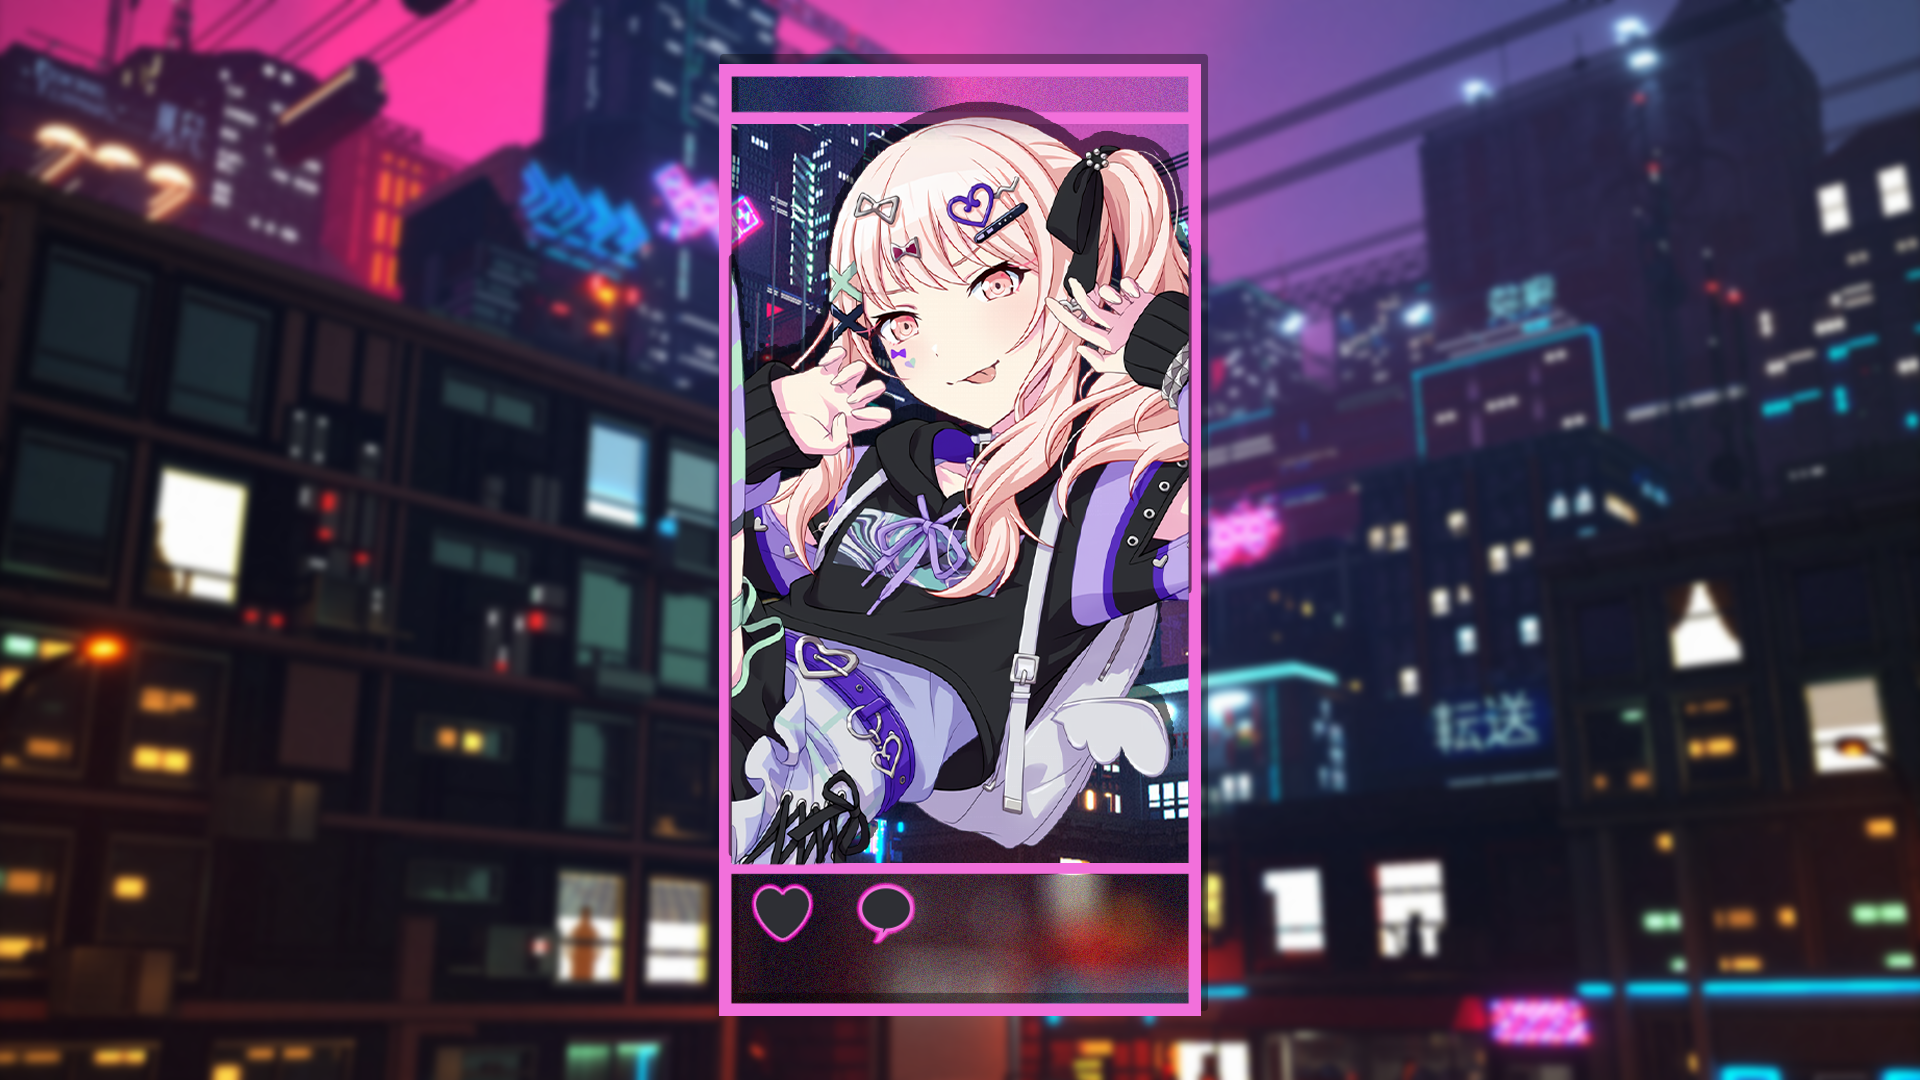 Project Sekai Colorful Stage Picture In Picture Neon City Anime Girls Tongue Out Blonde City Lights 1920x1080